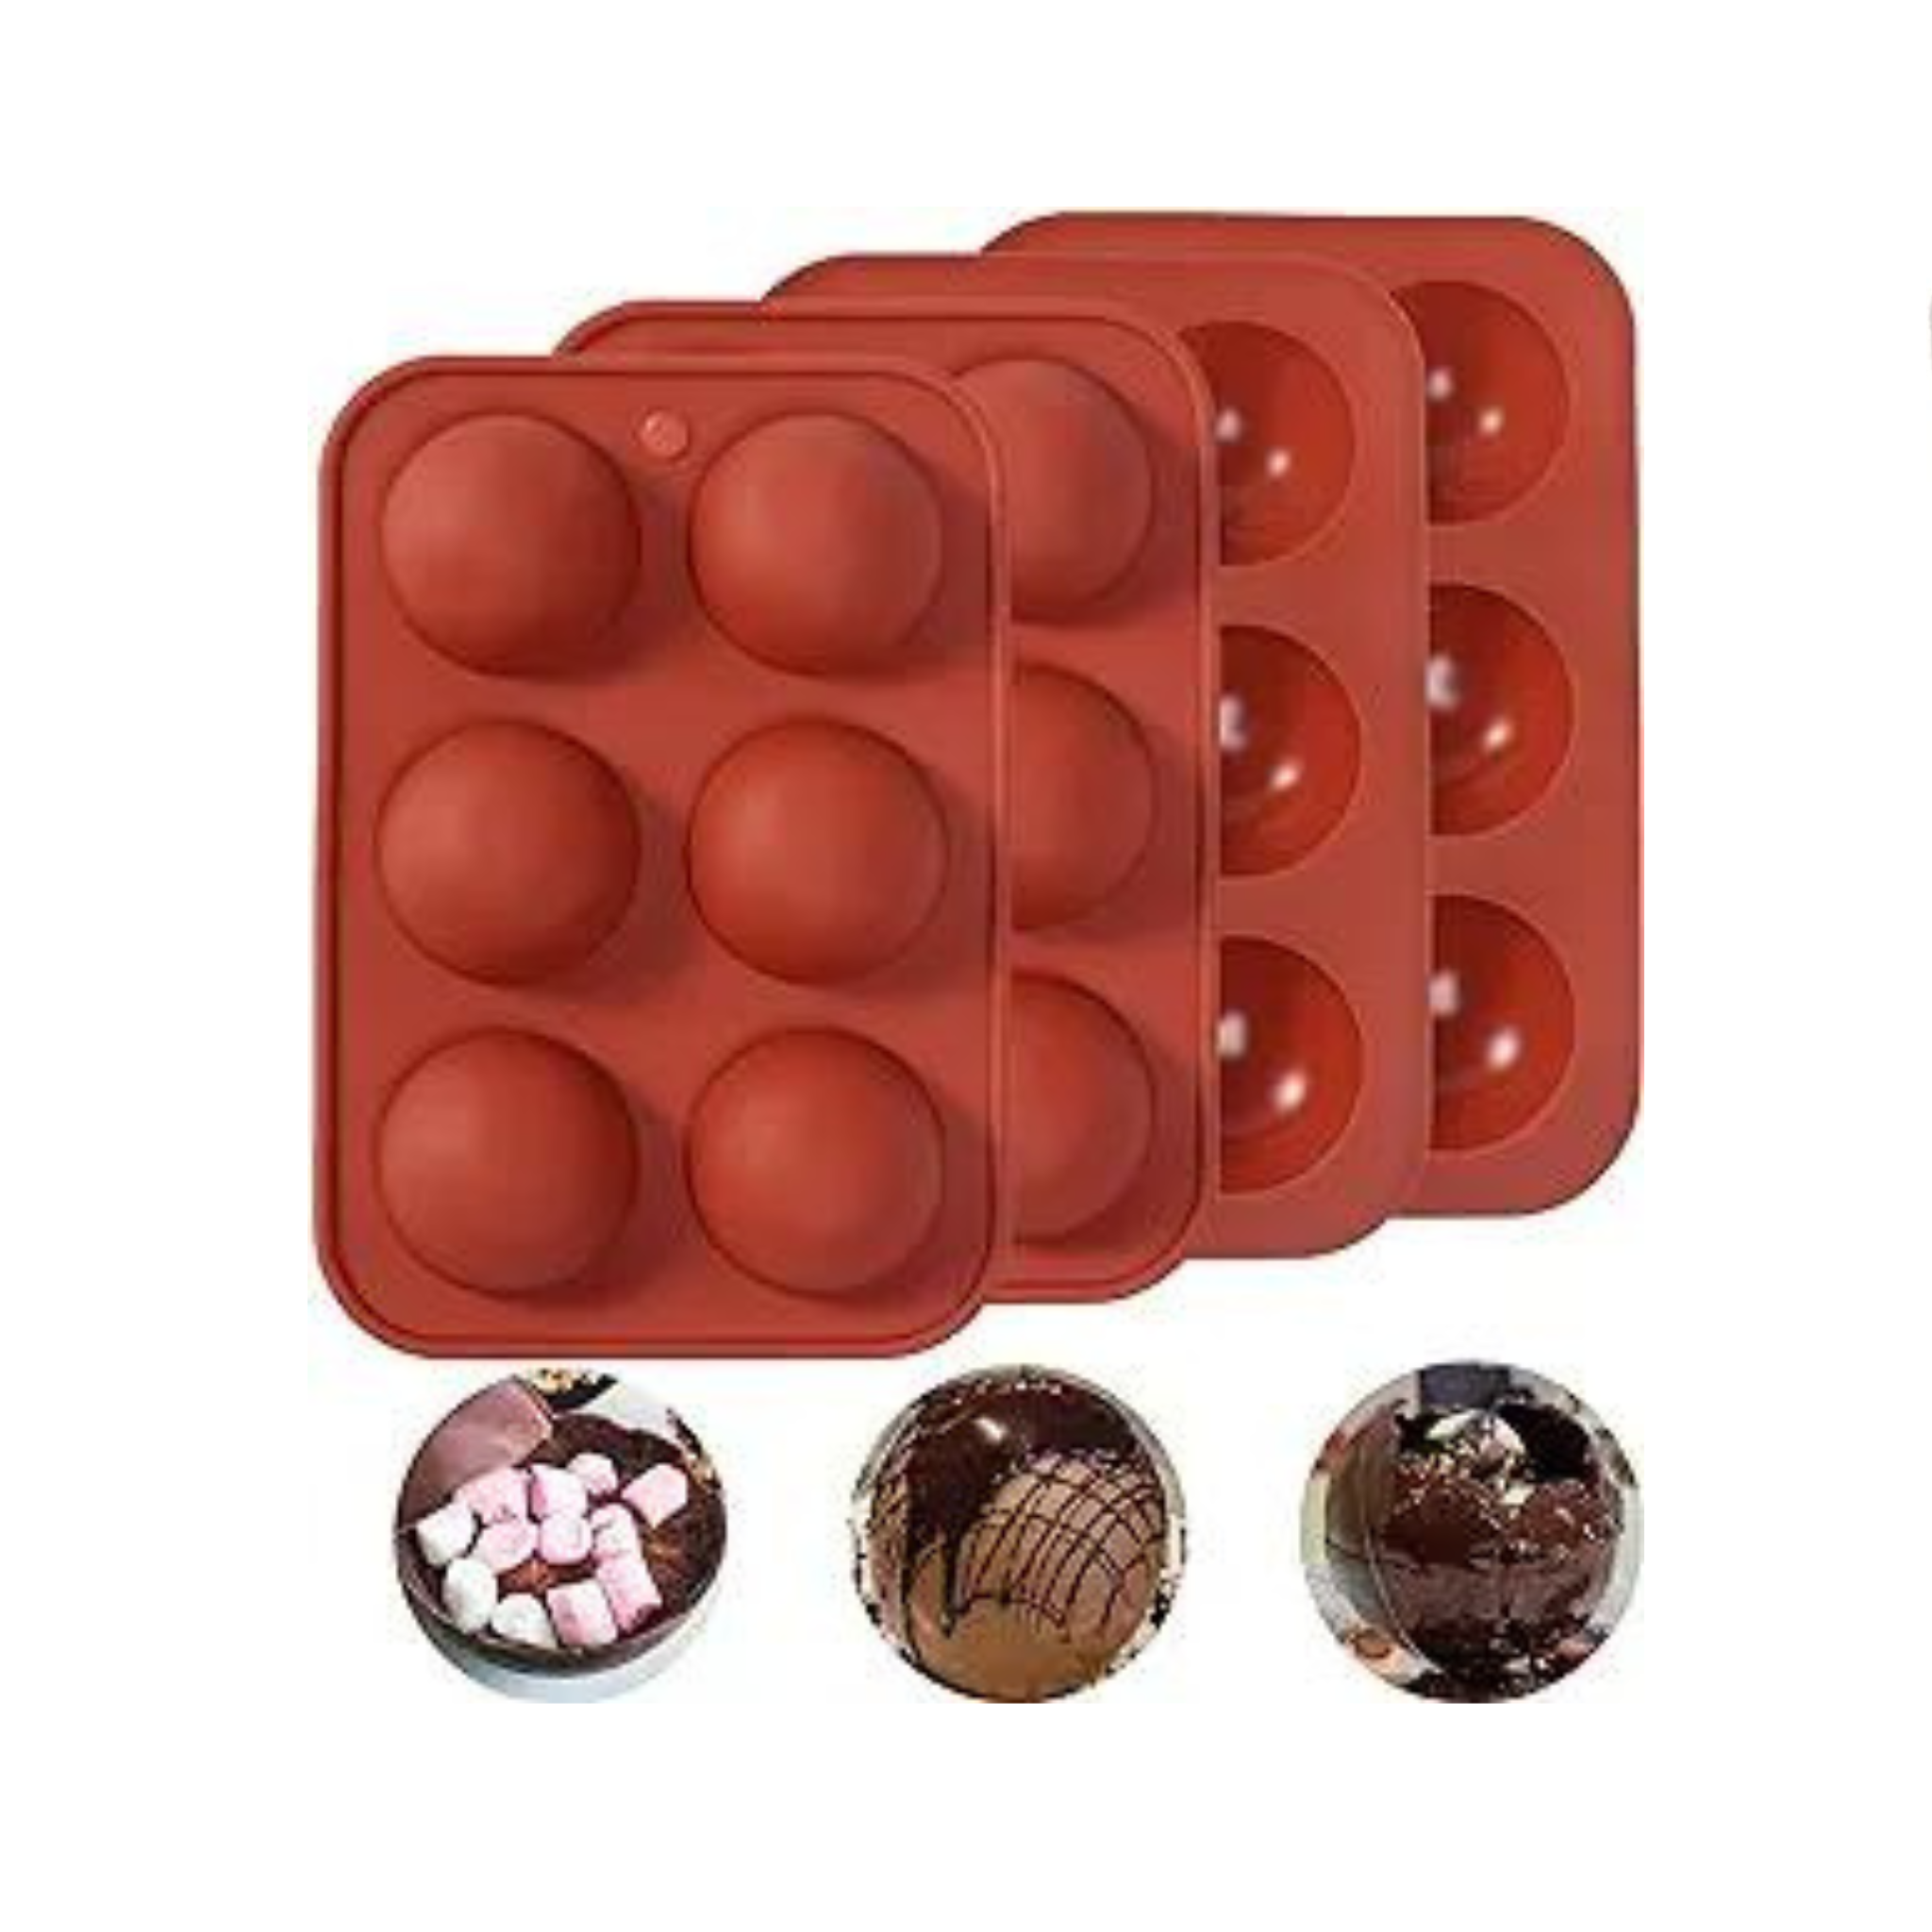 4 Packs Chocolate Molds Silicone